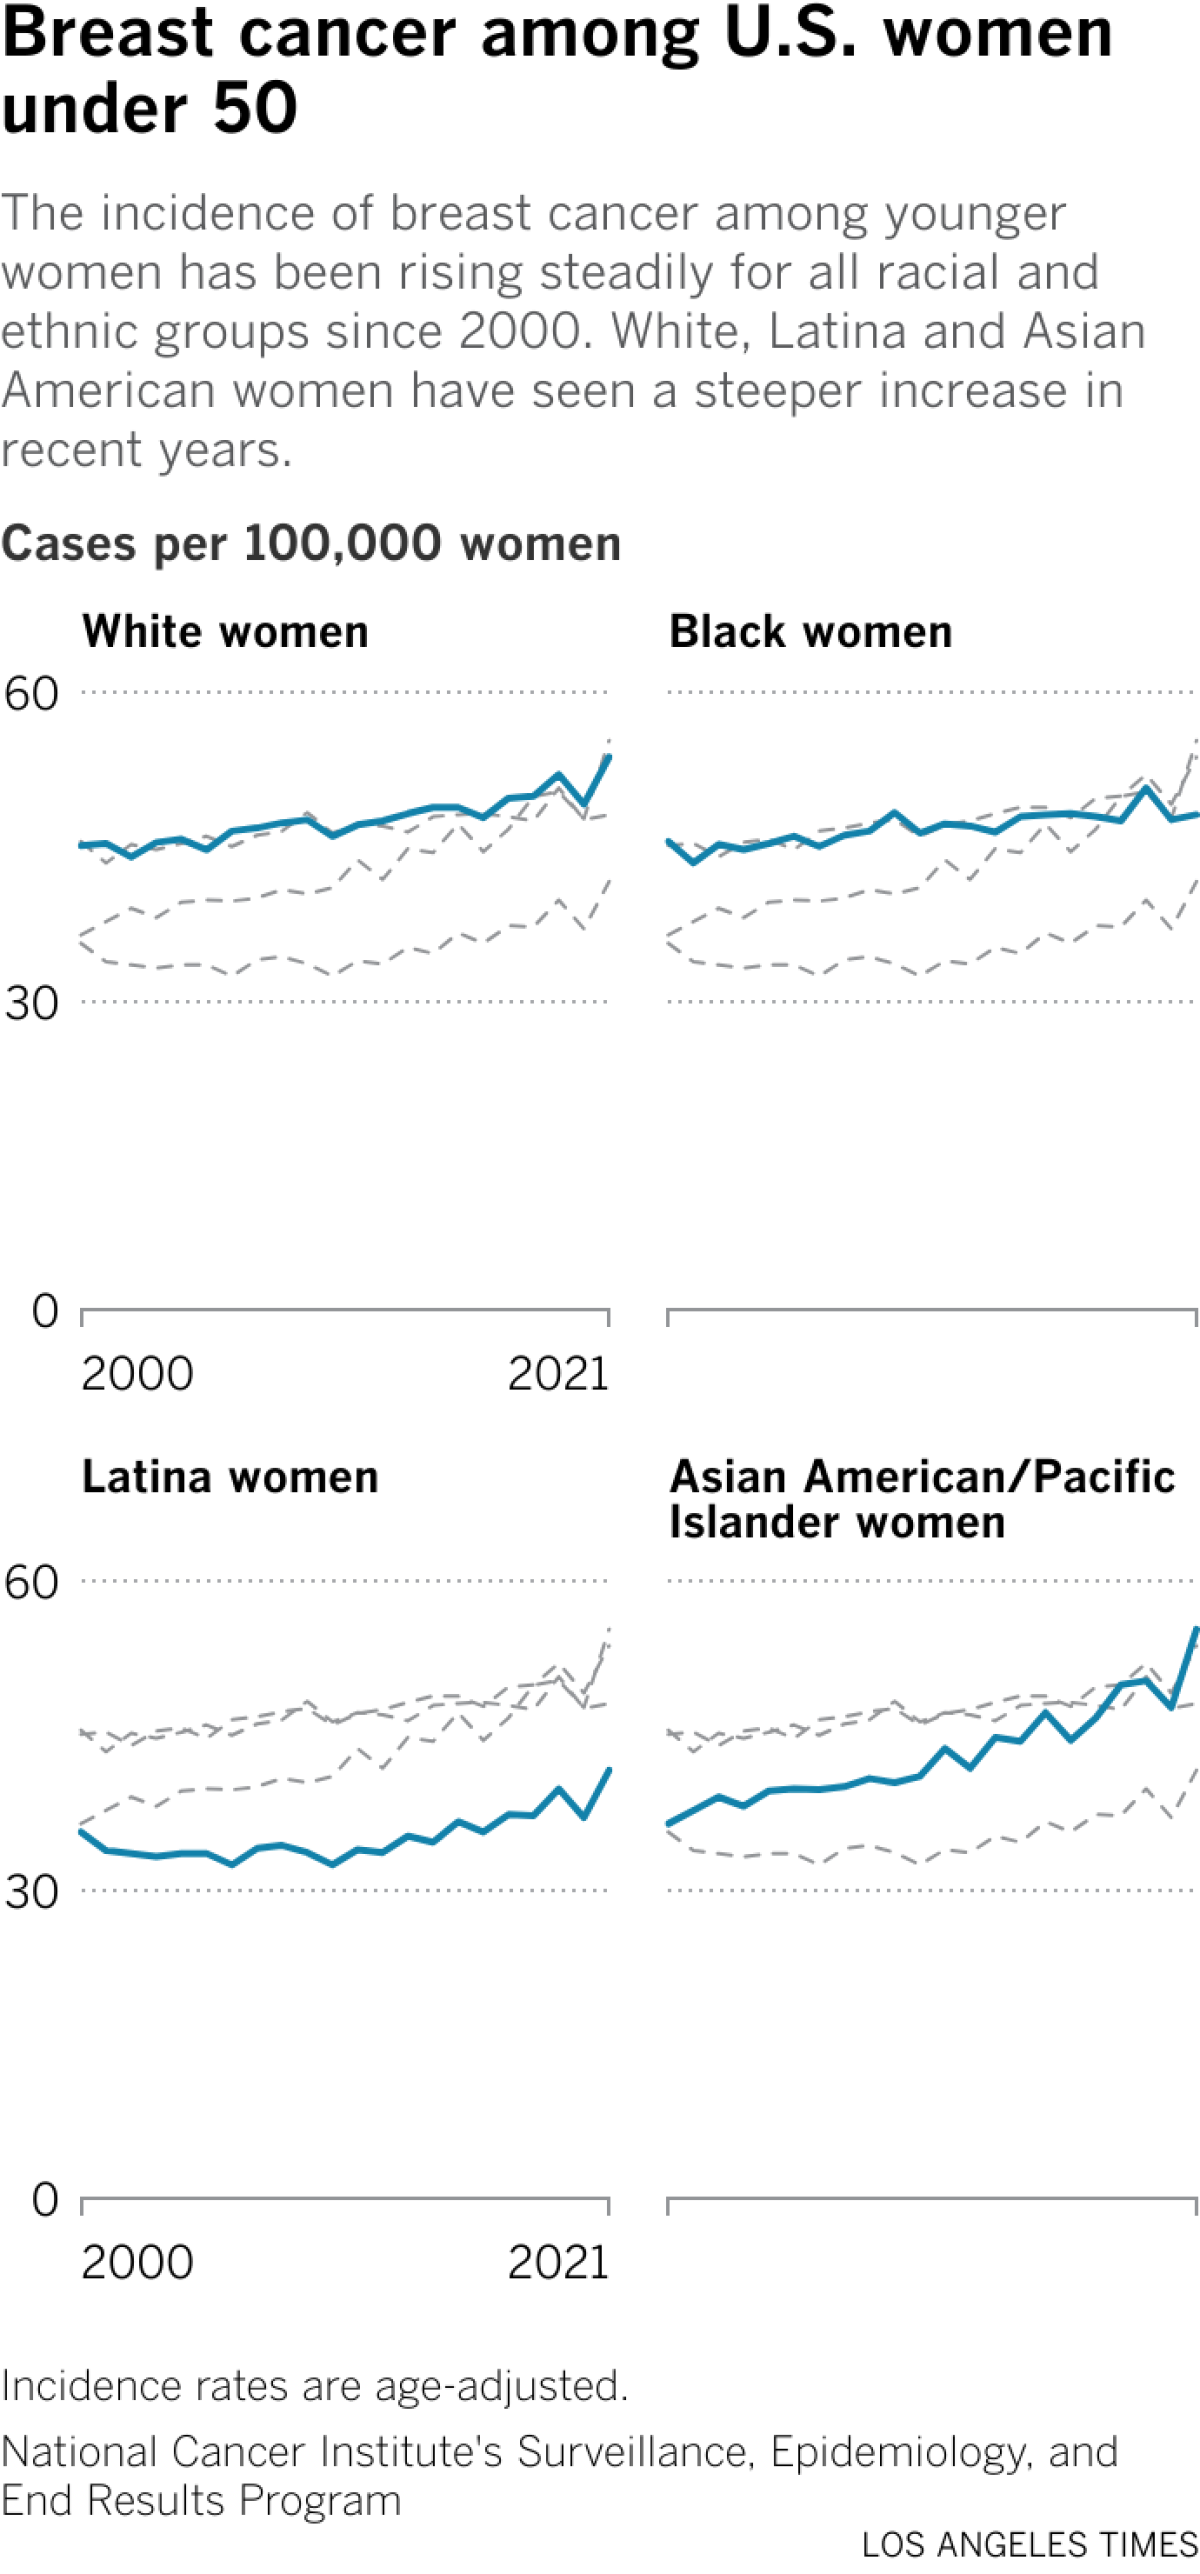 A line chart compares breast cancer rates in women under 50 by race. In 2021, the rate for white women was 53.7 cases per 100,000 women. The rate for Black women was 48.1; for Latina women, 41.6; and for Asian American/Pacific Islander women, 55.3.